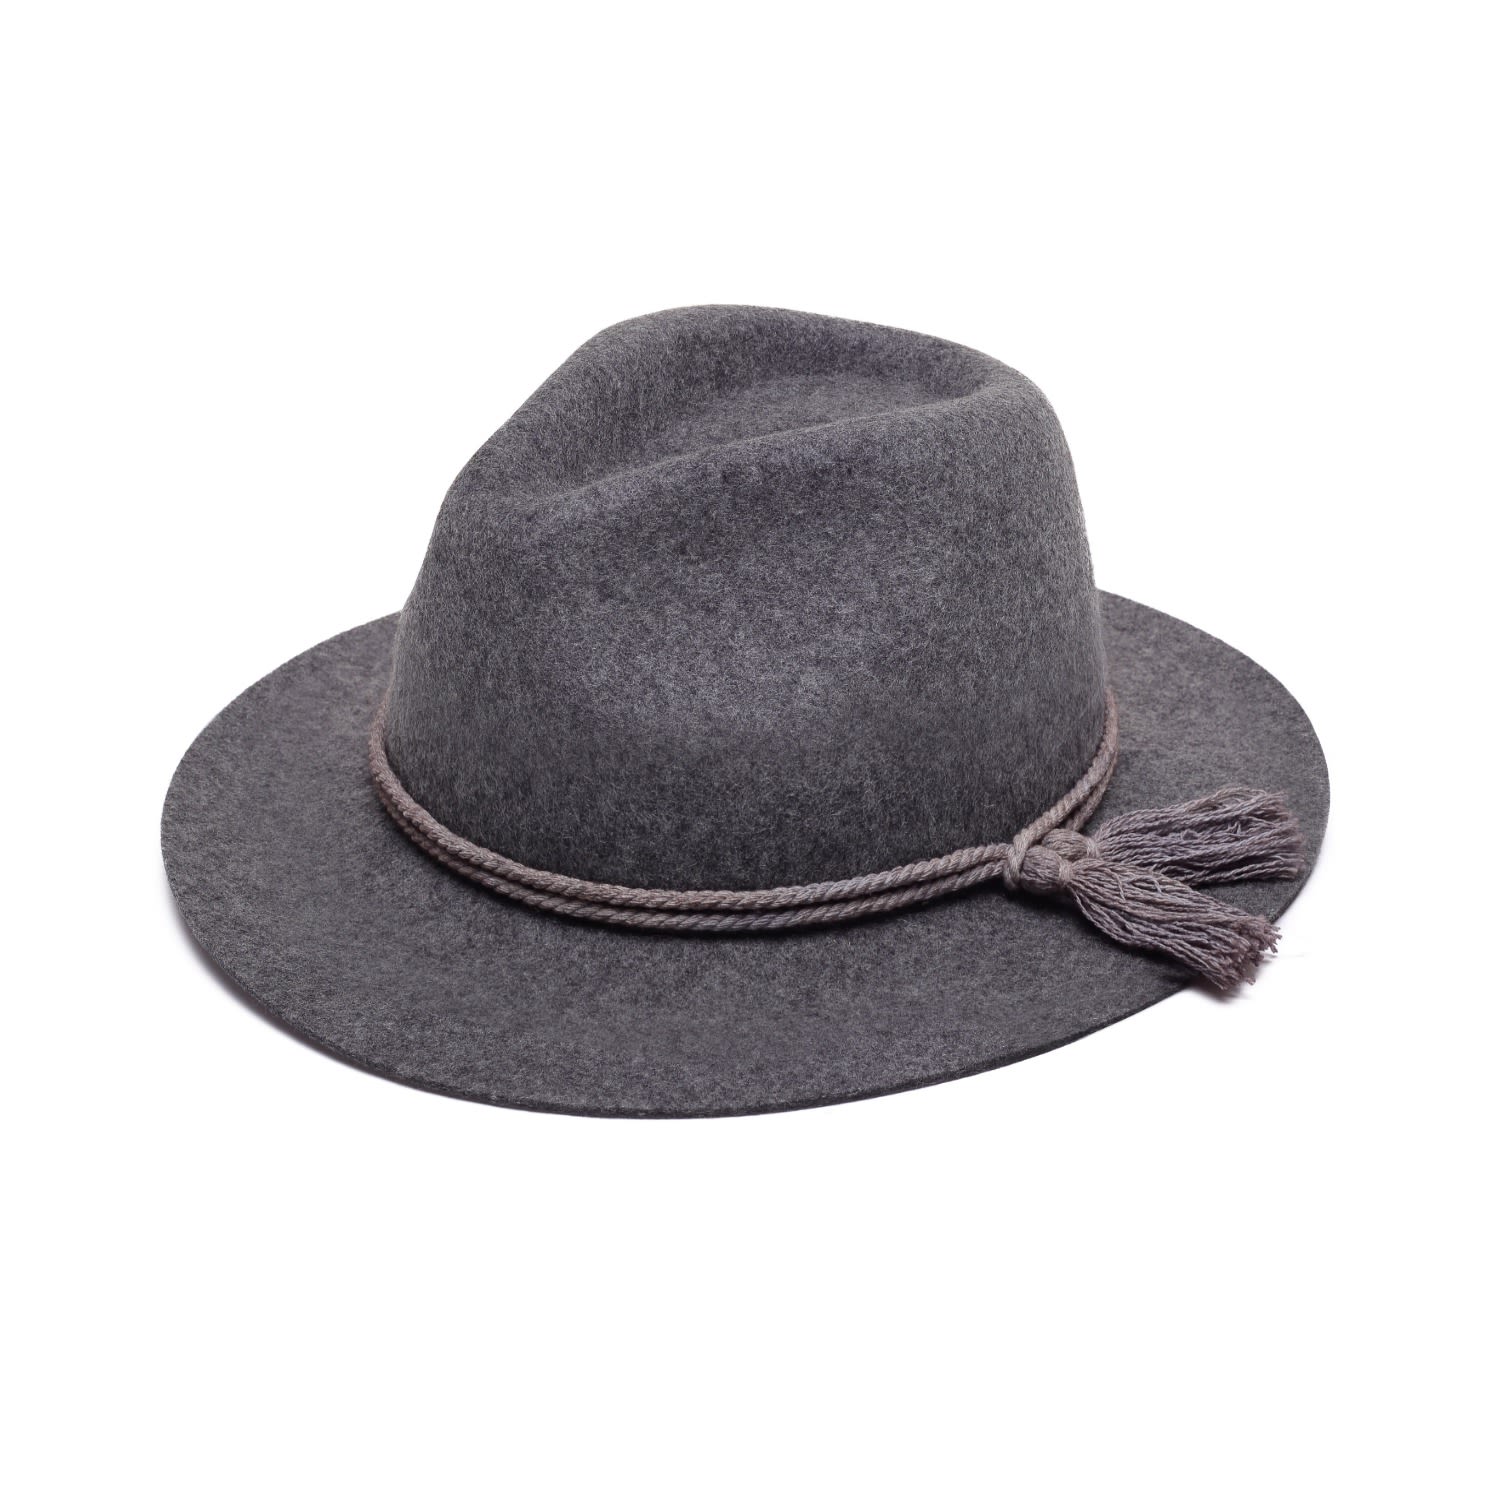 Women’s Grey Fedora Hat With Cotton Tassels Extra Small Justine Hats